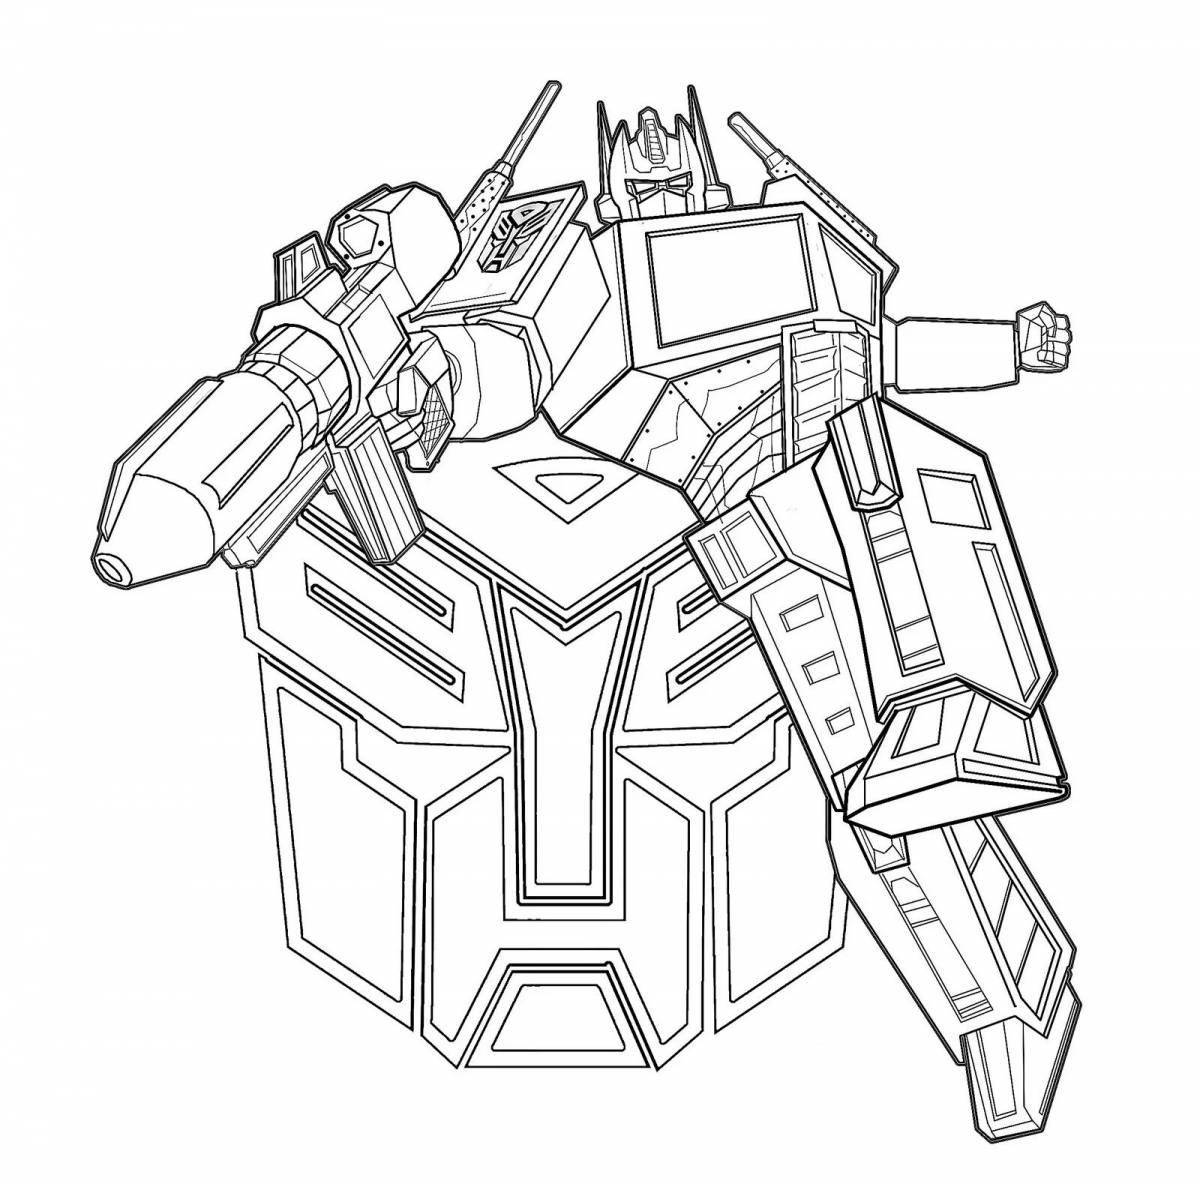 Coloring pages transformers color explosion for children 6-7 years old